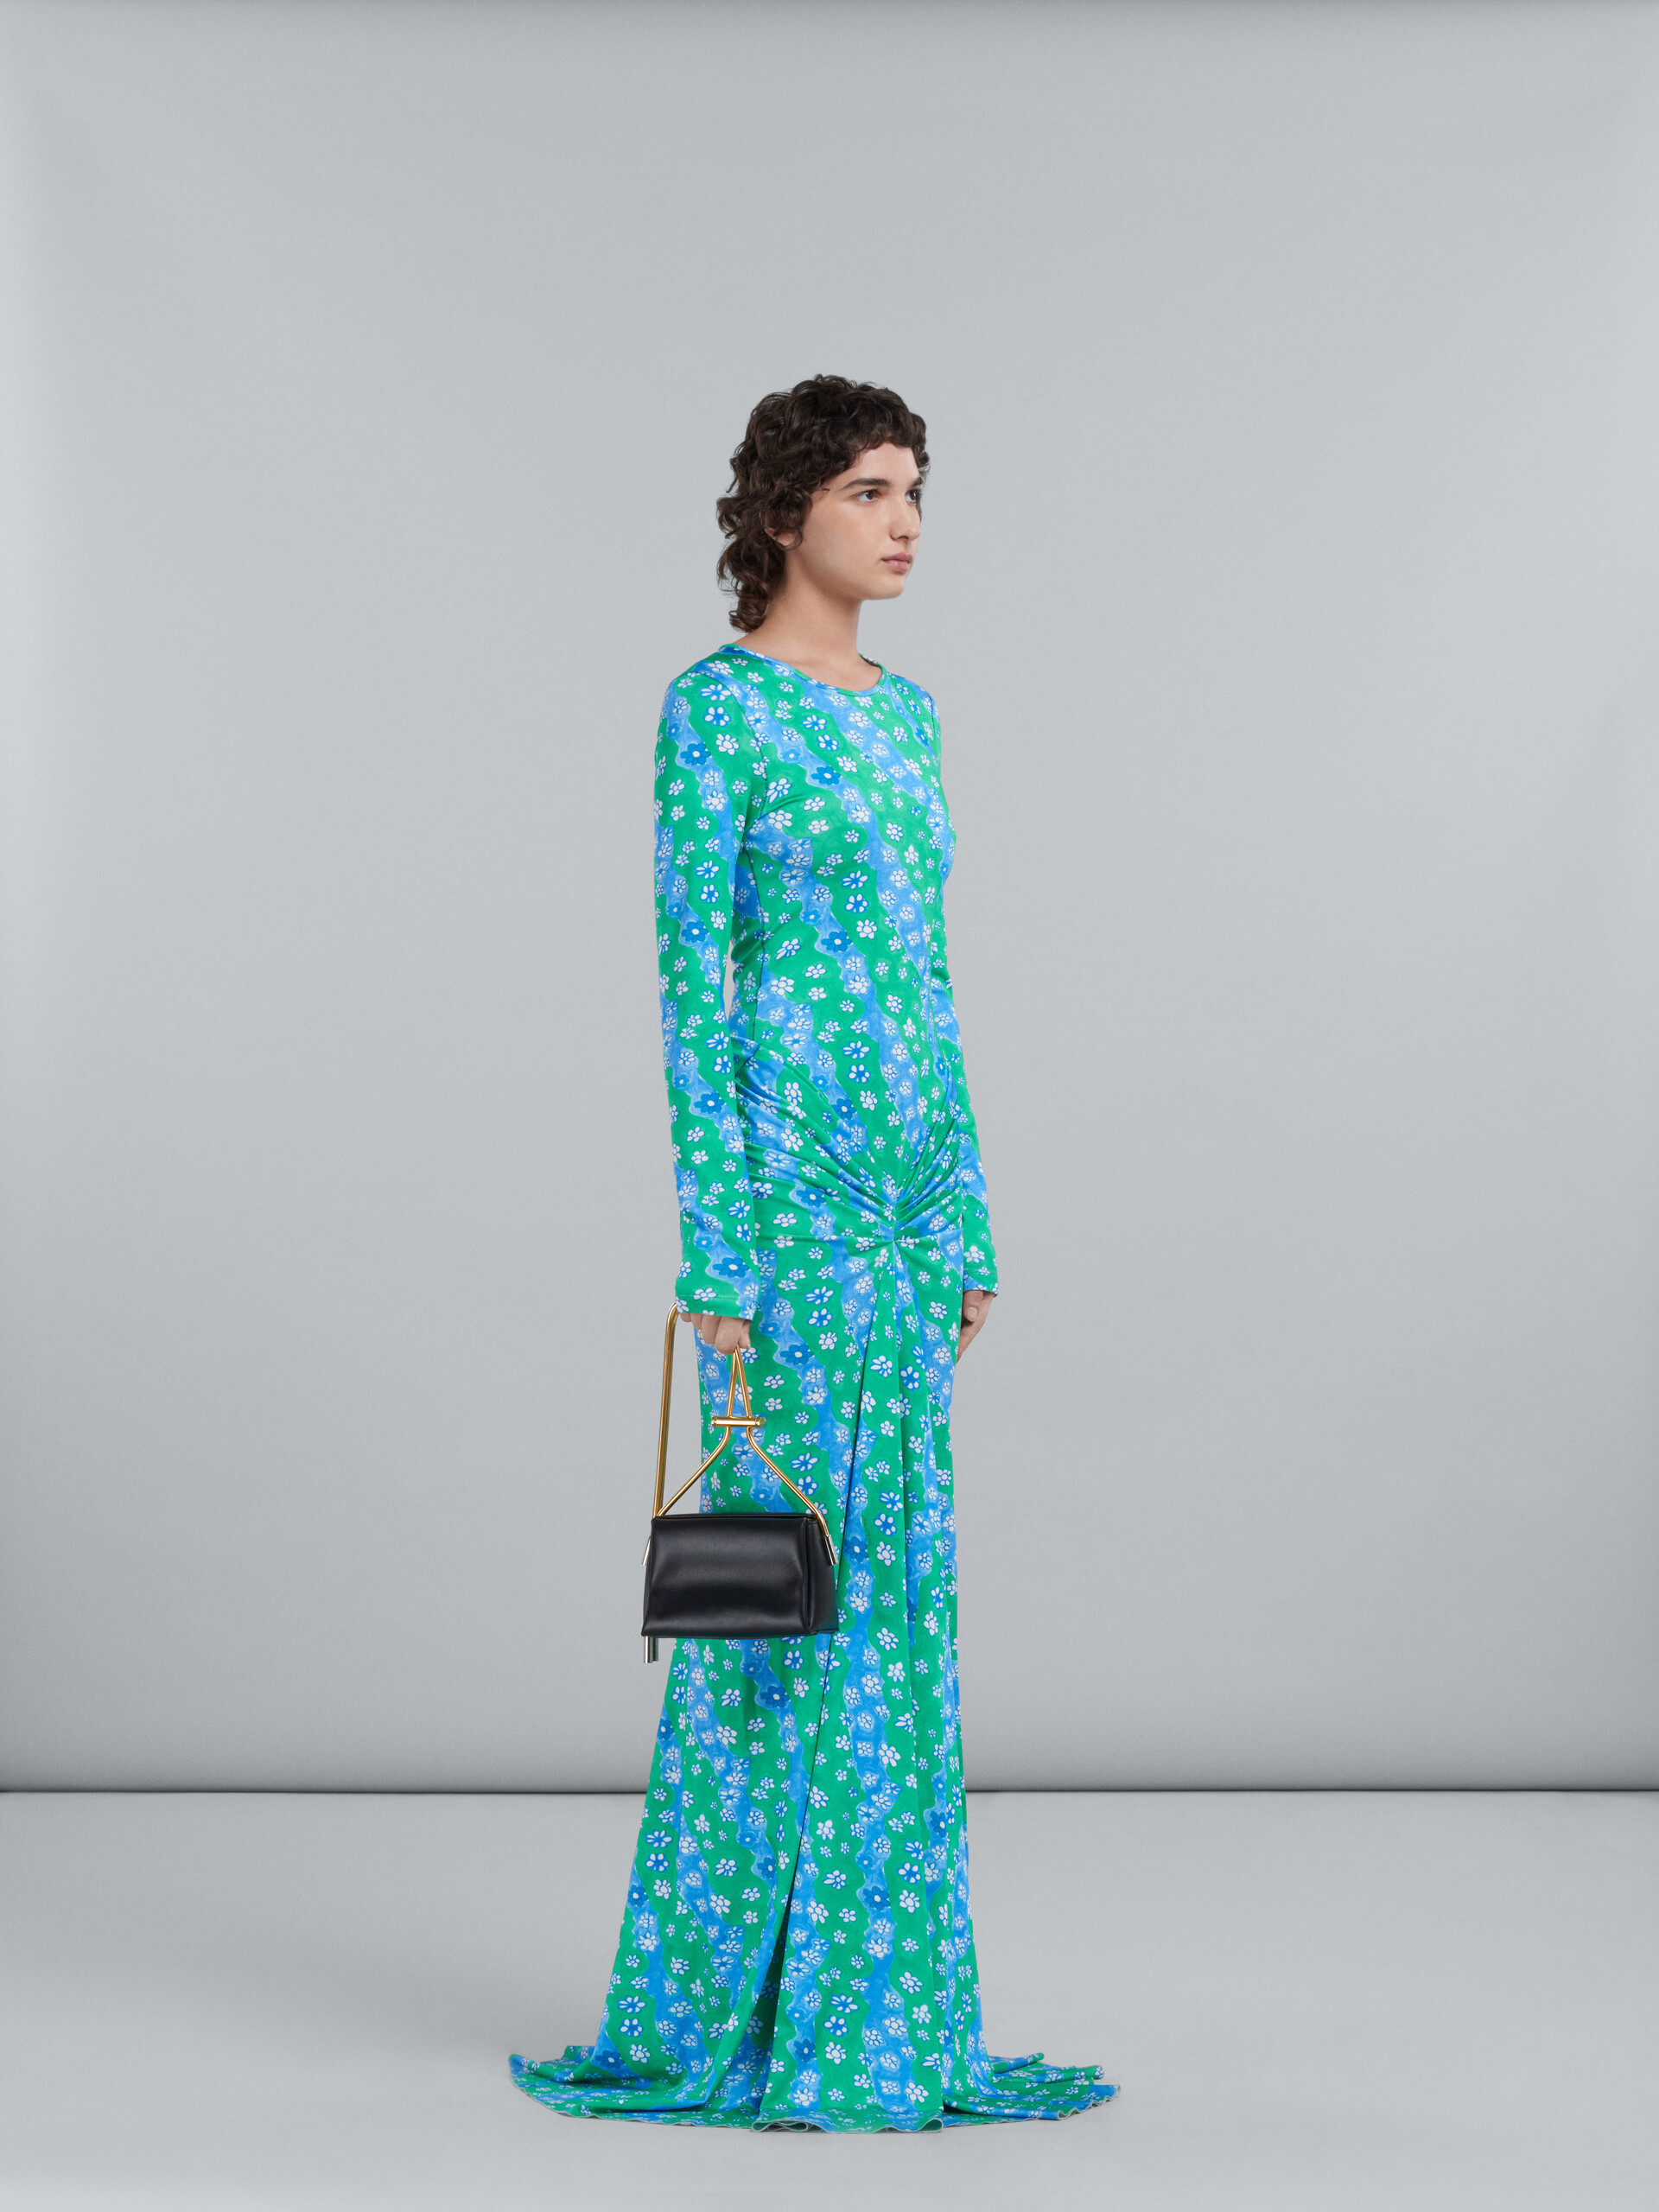 Long dress in fluid printed jersey - Dresses - Image 6